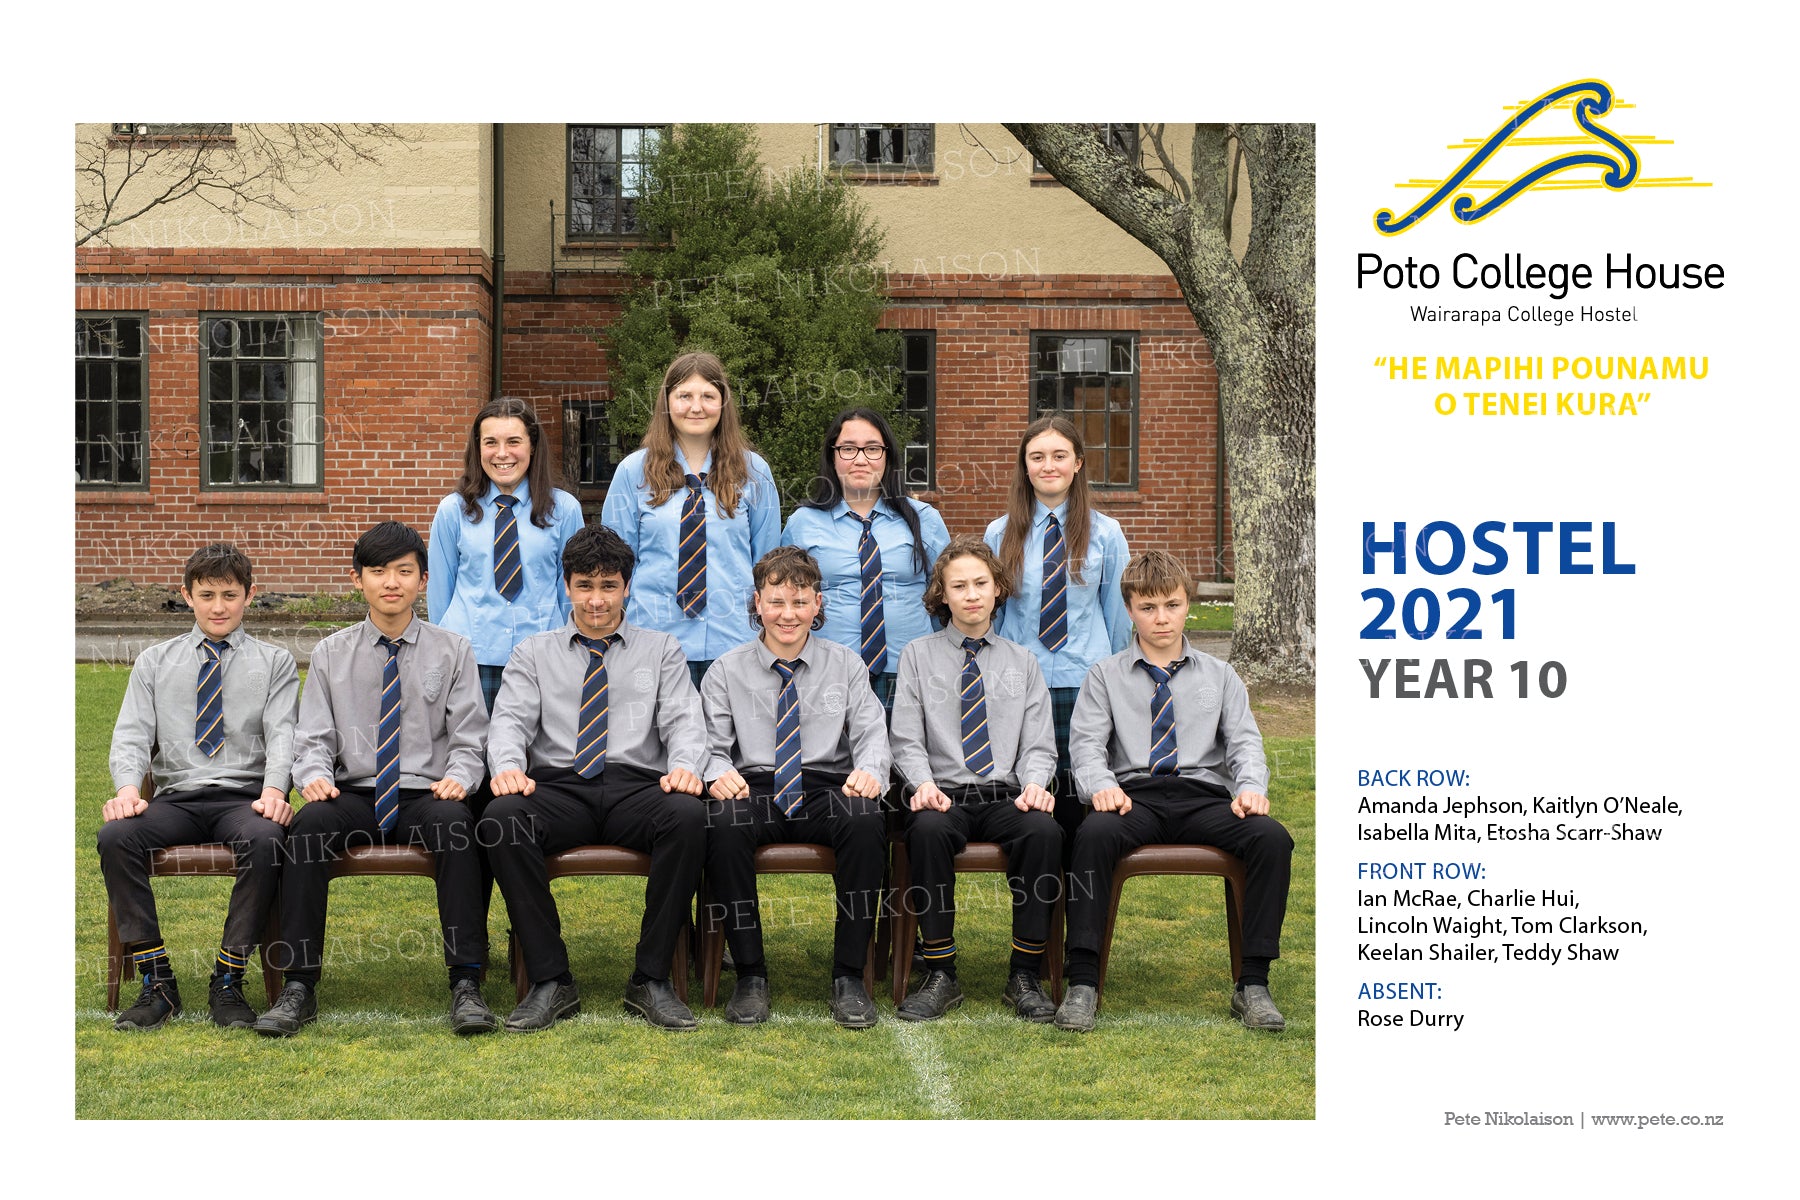 Year 10 Poto College House - 2021